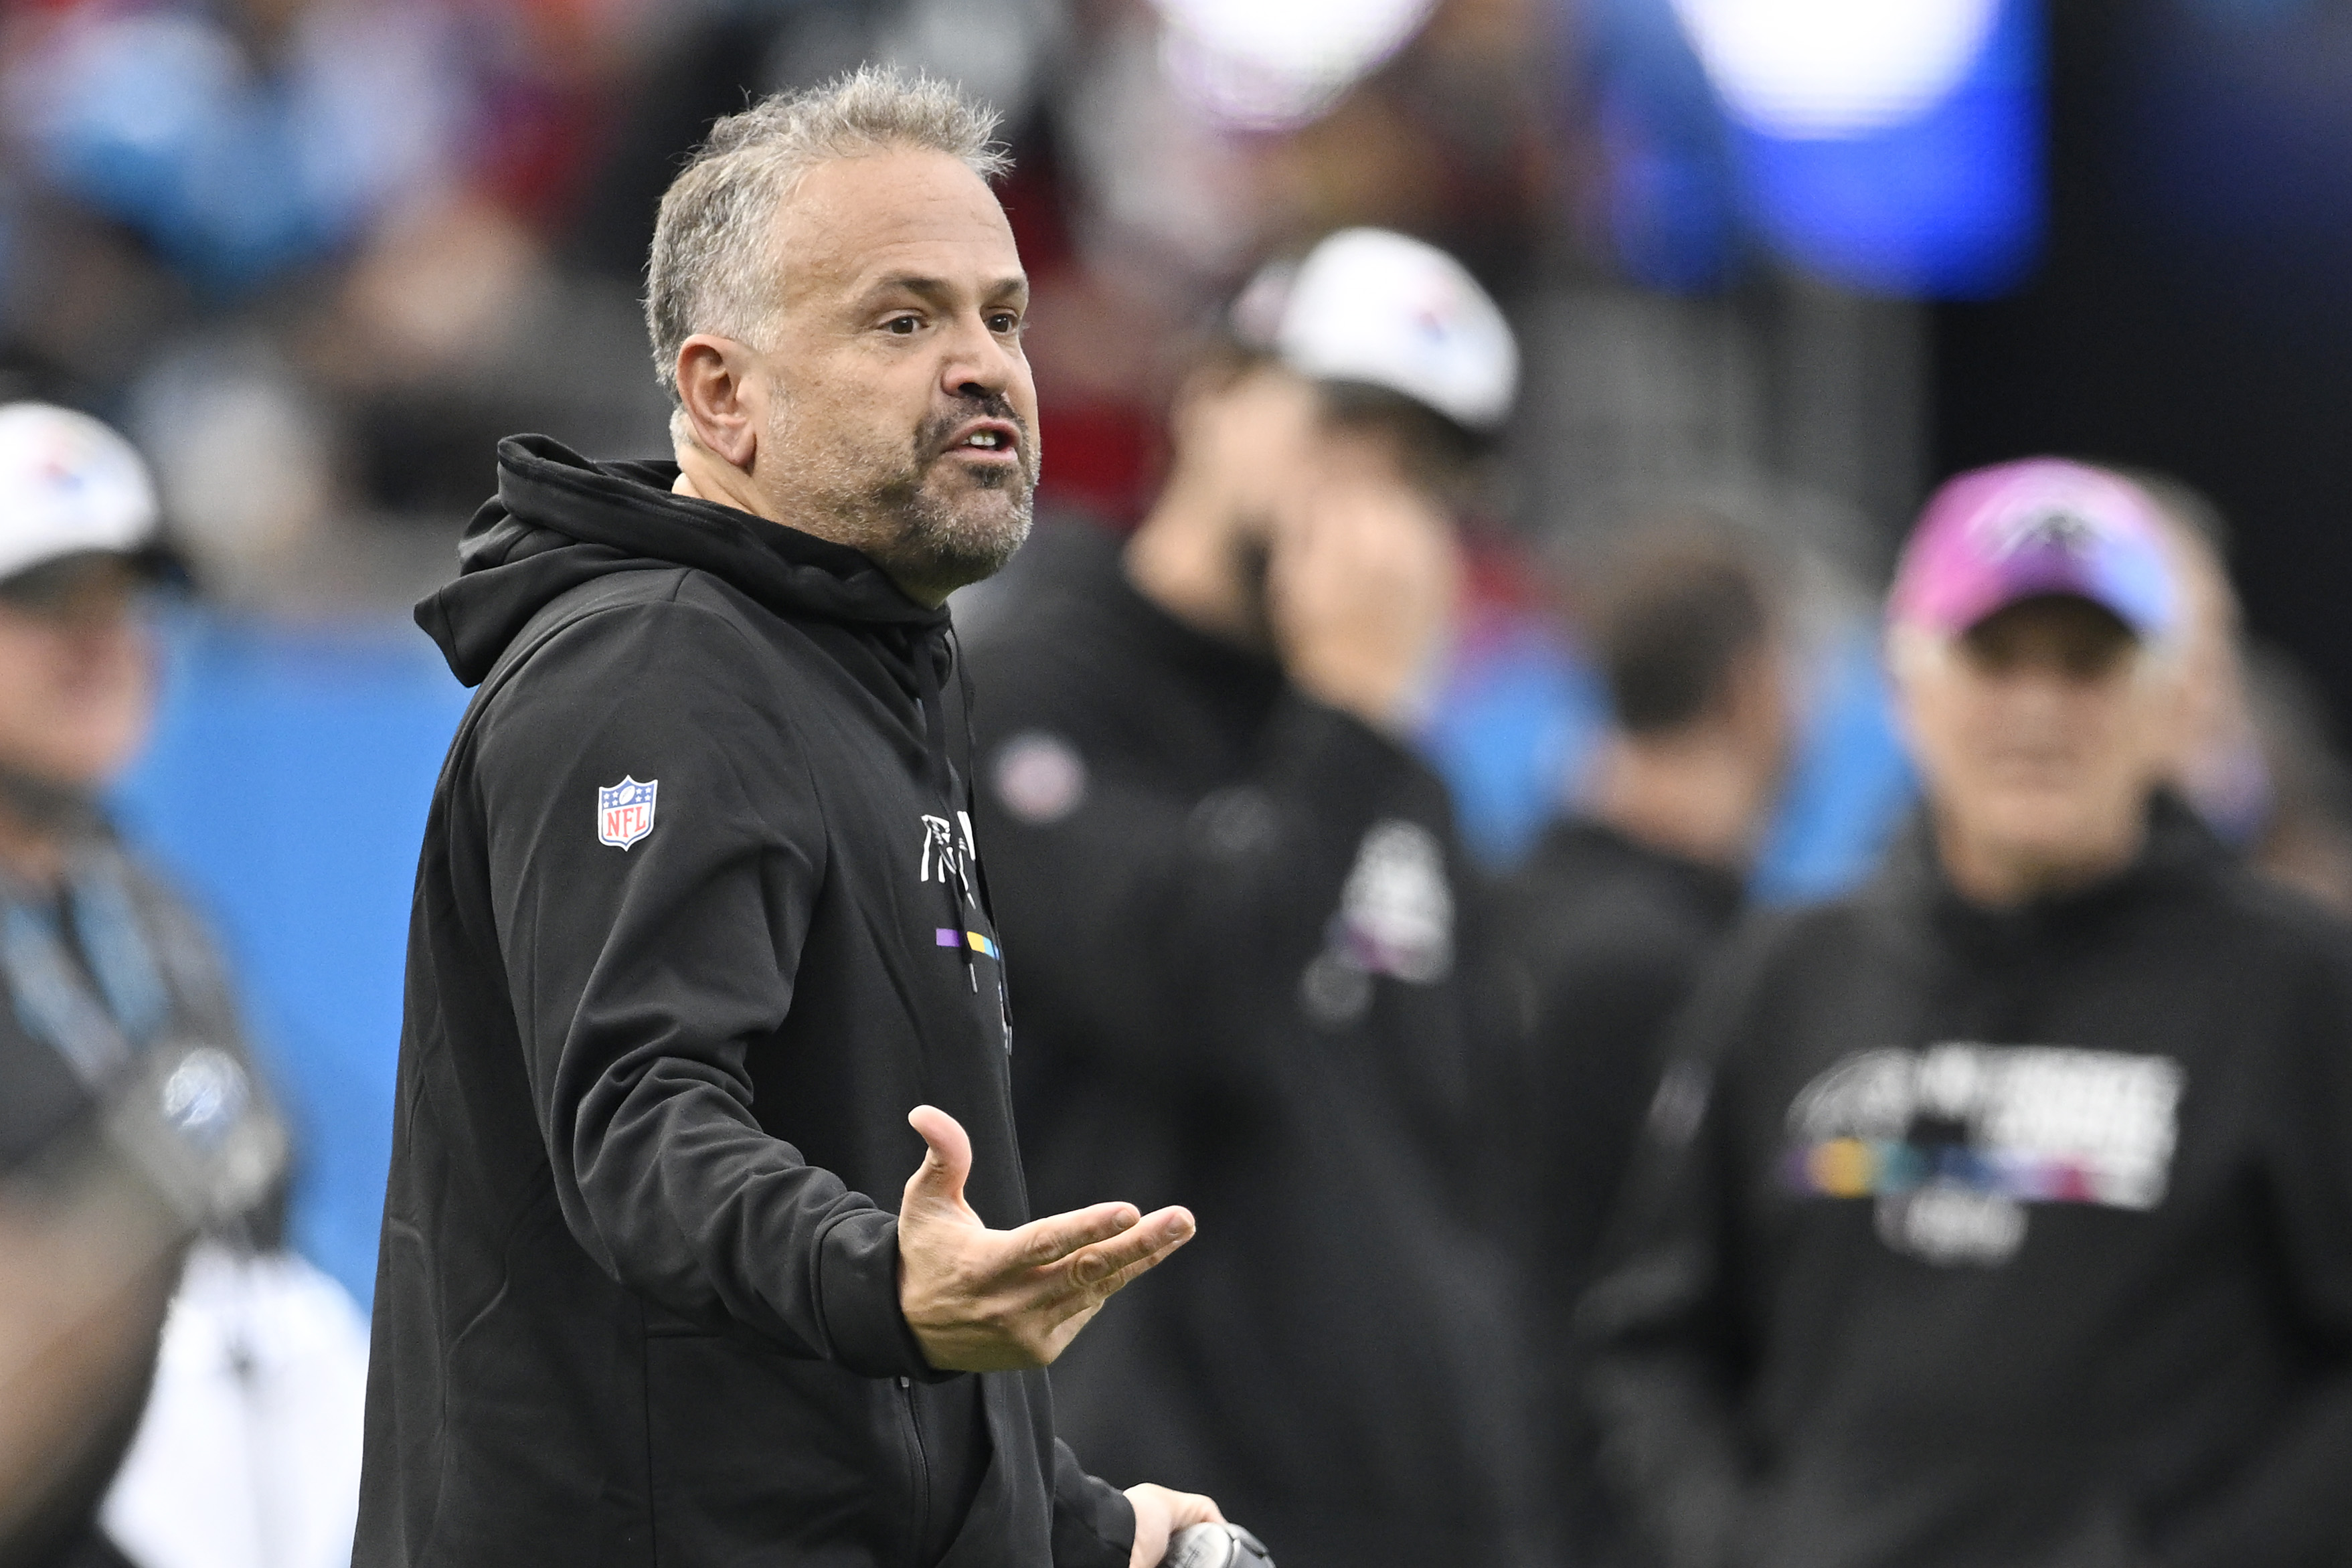 Head coach Matt Rhule of the Carolina Panthers talks with officials during the second quarter of the game against the San Francisco 49ers at Bank of America Stadium on October 09, 2022 in Charlotte, North Carolina.